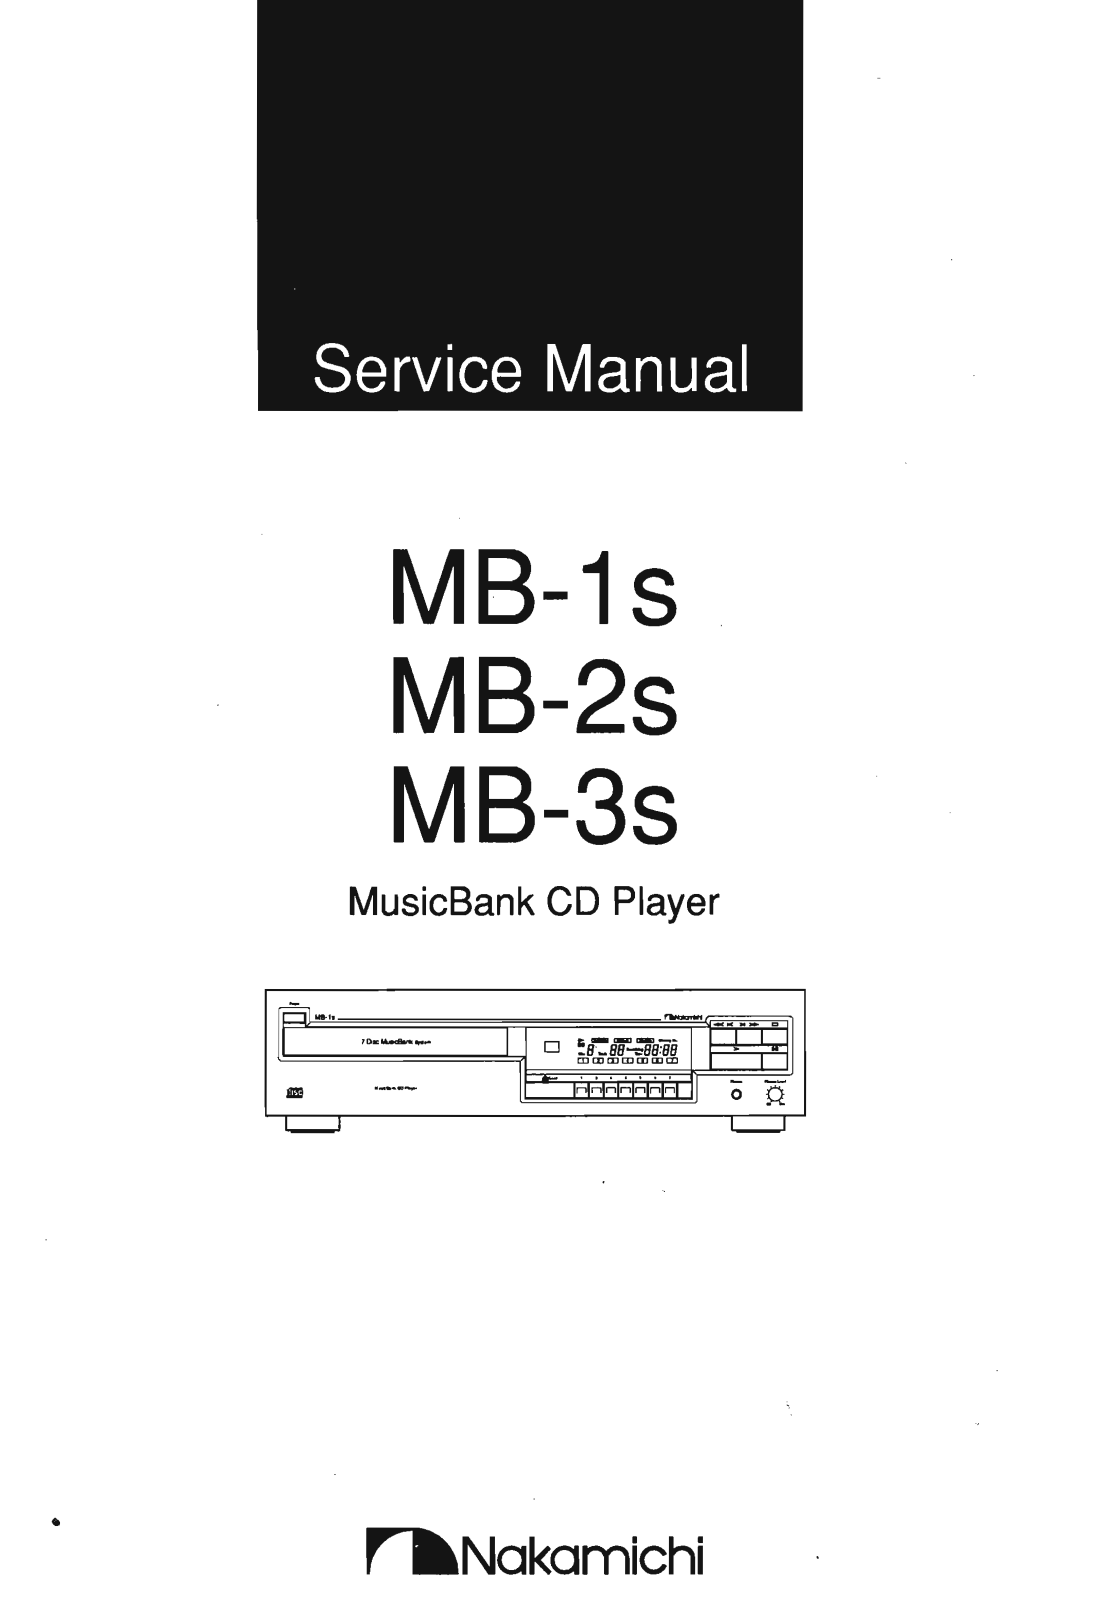 Nakamichi mb1s, mb2s, mb3s schematic